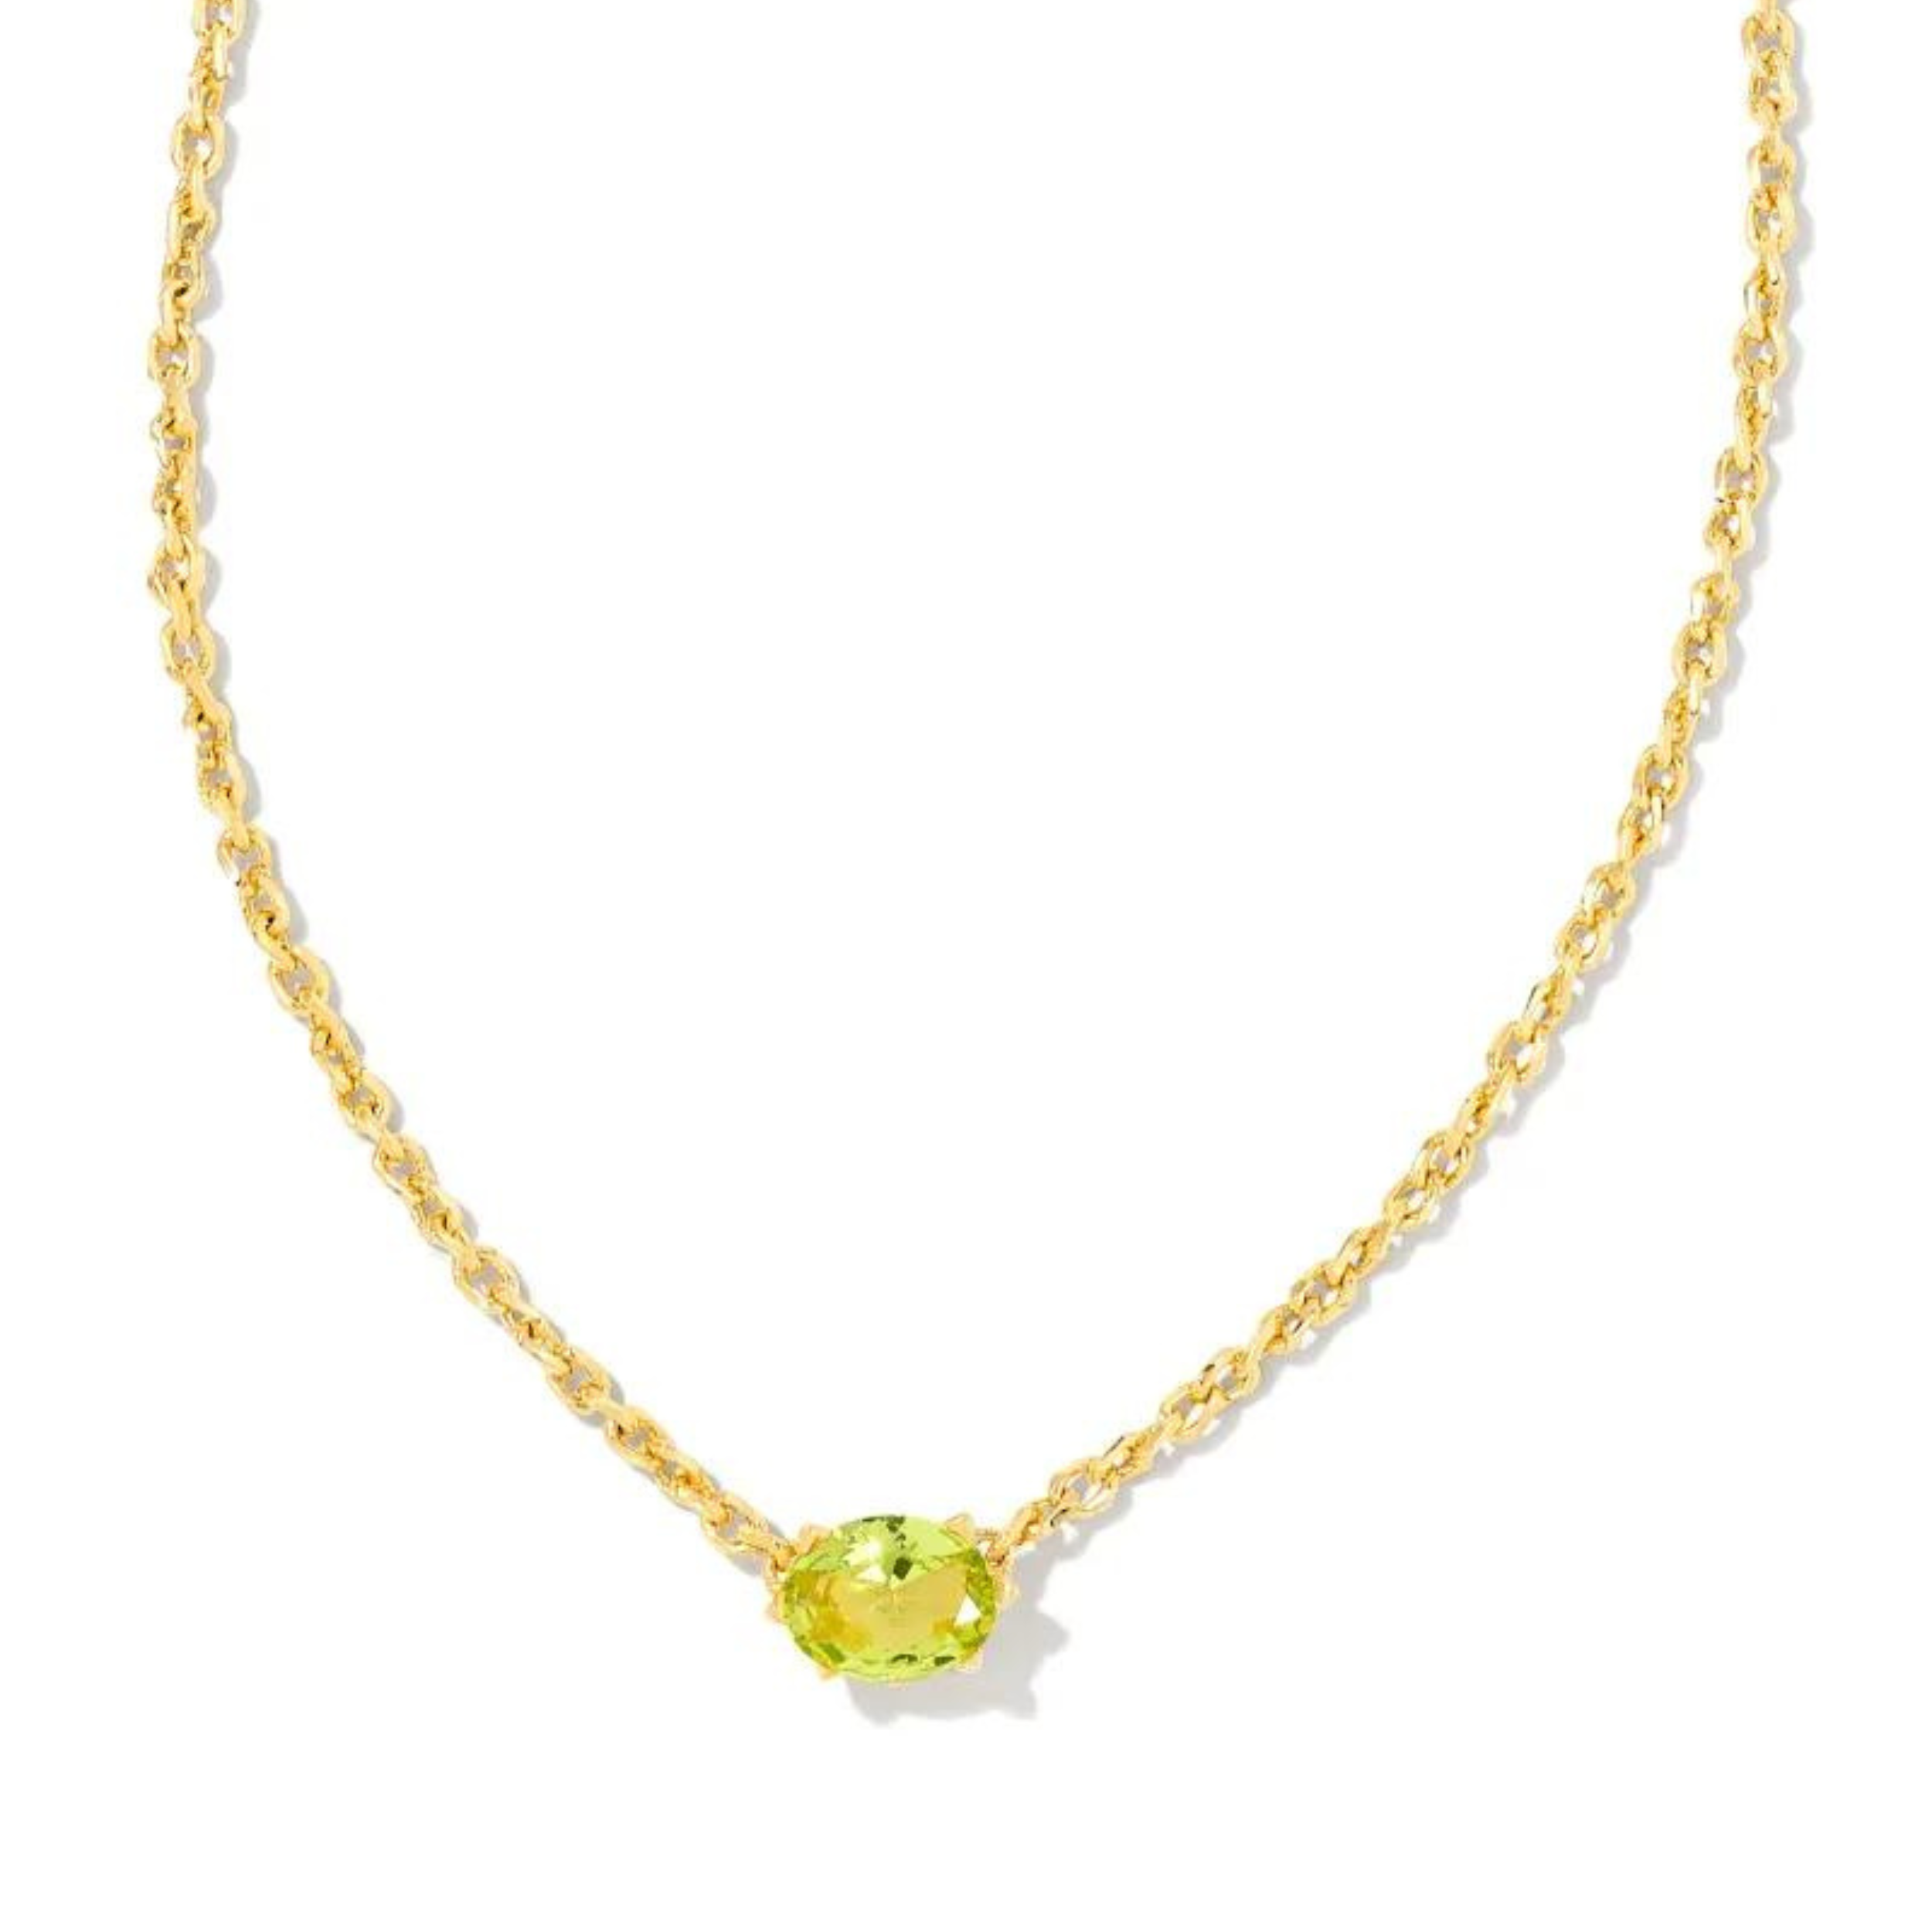 Gold necklace with green peridot crystal stone, pictured on a white background.